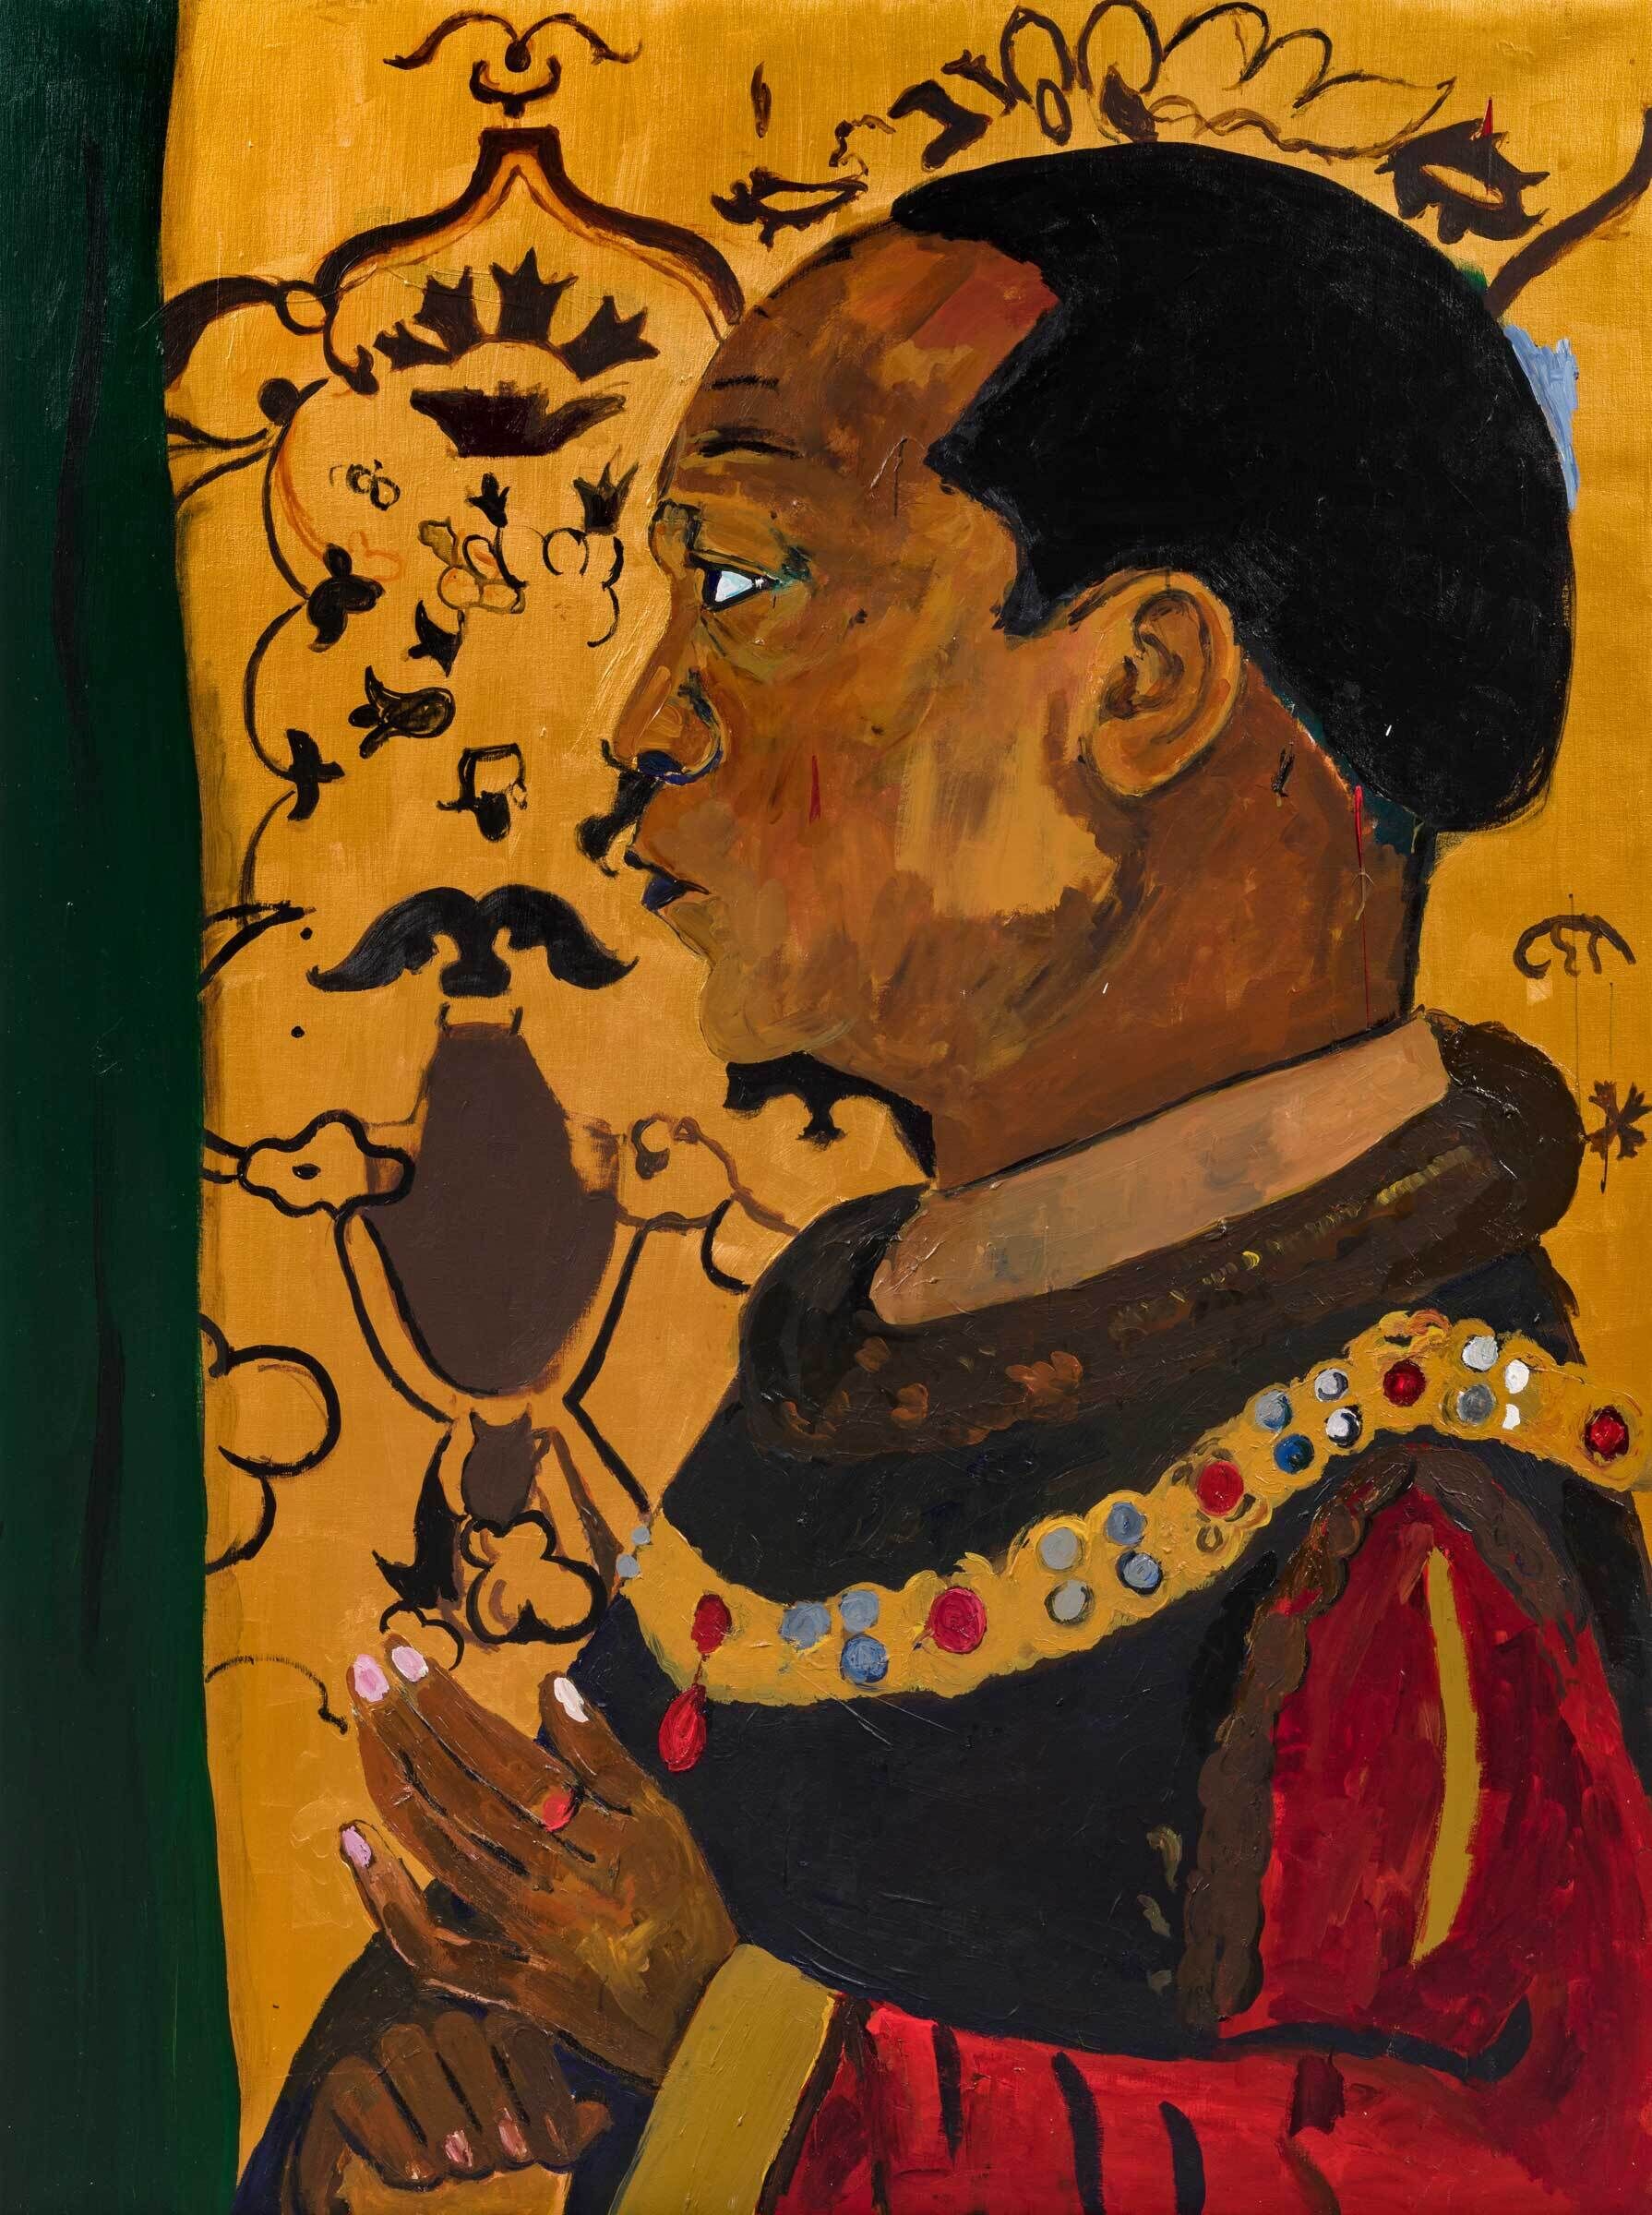 A portrait of a Black man in profile view. He is wearing a regal cloak-like garment with rich red sleeves. Gold and jeweled embellishments drape across his chest and shoulders. The background is a golden yellow color with a dark brown floral pattern.